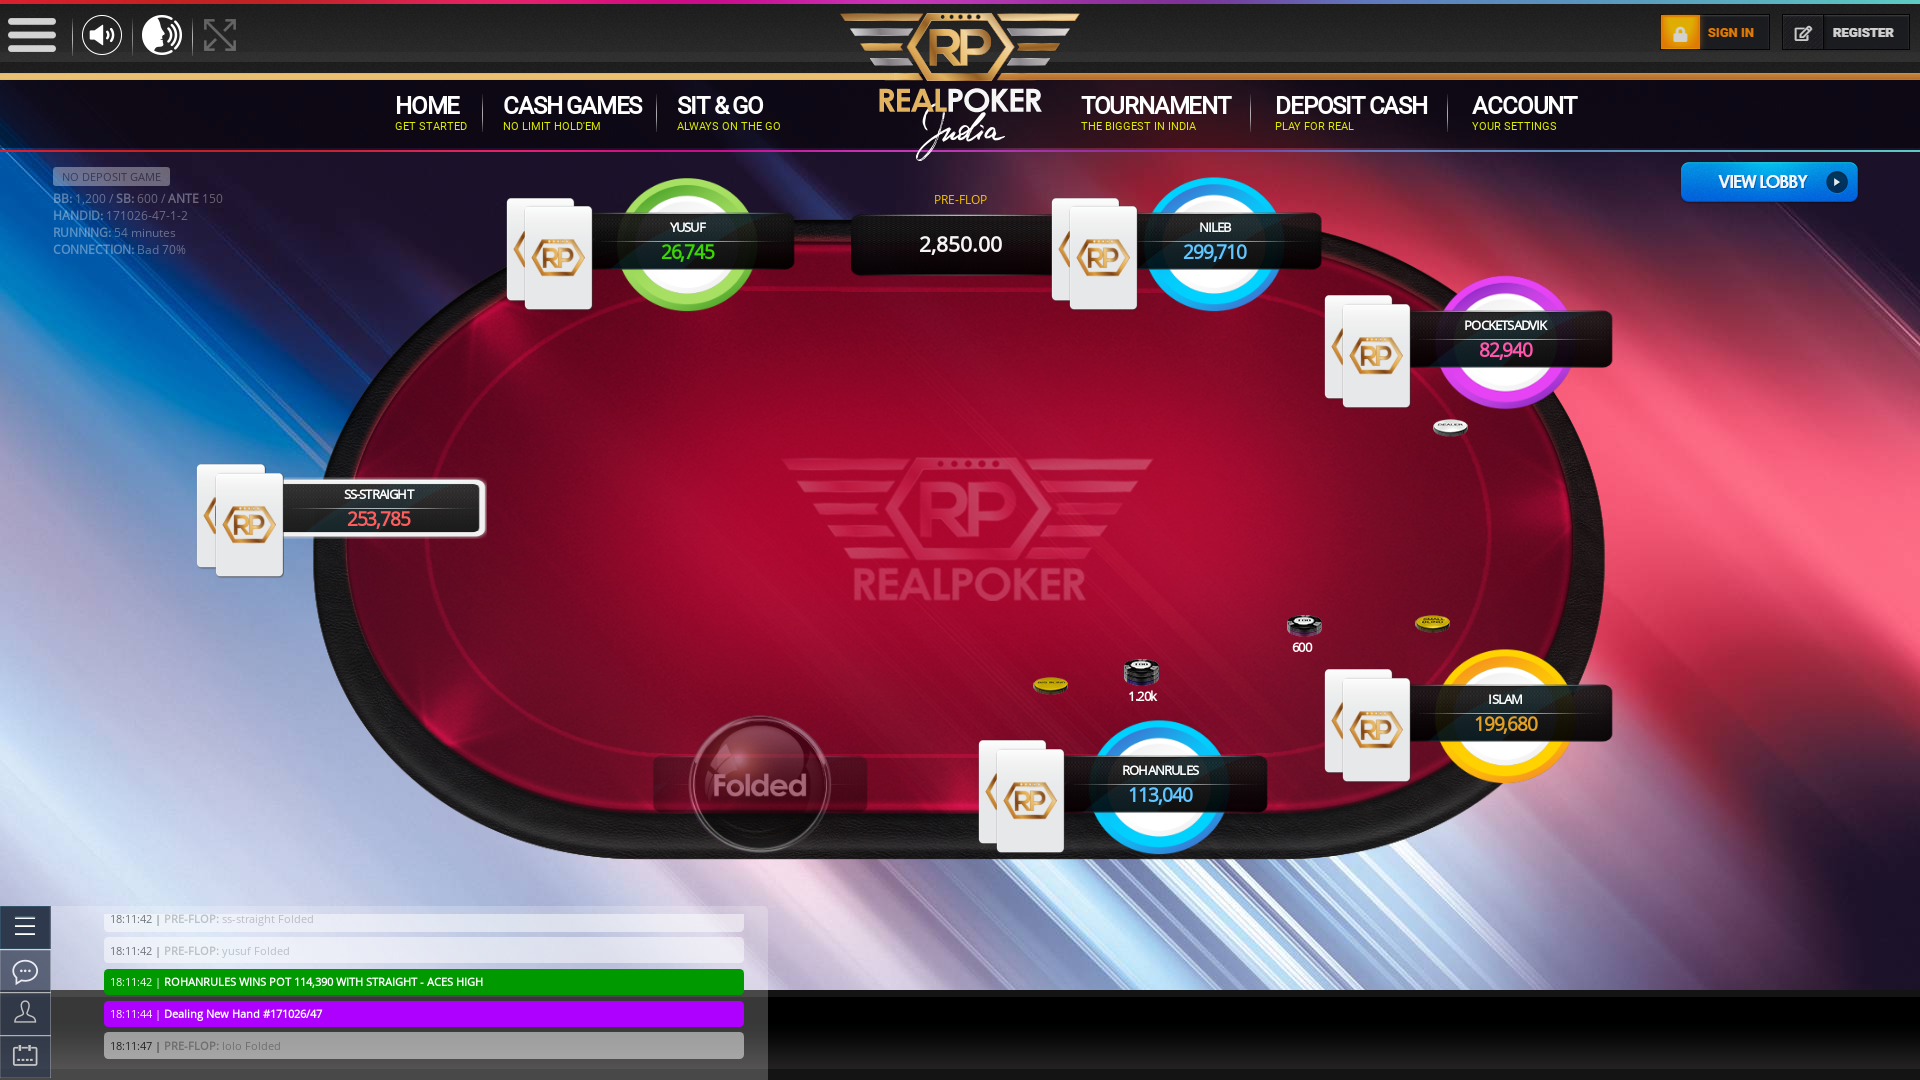 Online poker on a 10 player table in the 54th minute match up